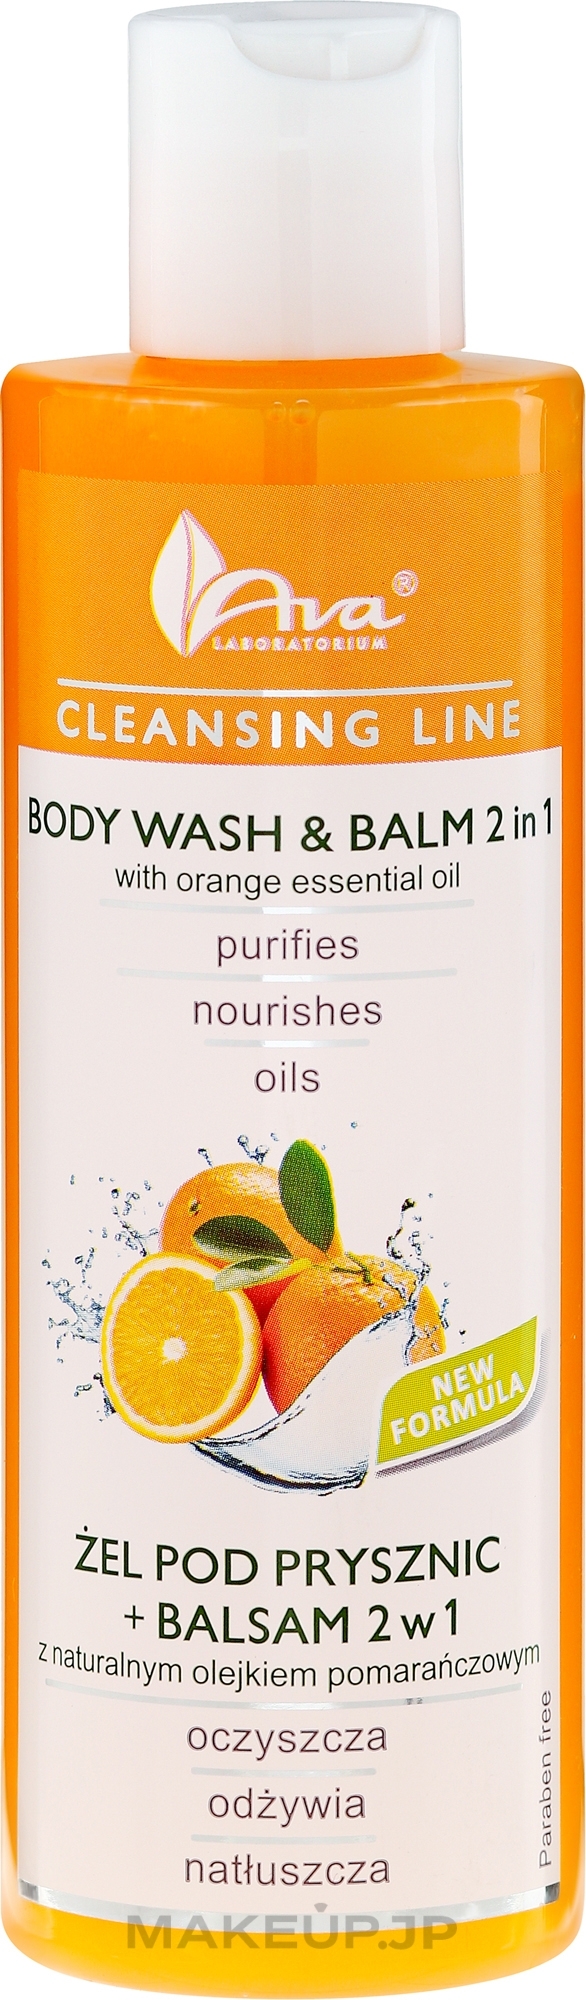 2-in-1 Cleansing Body Gel Balm - Ava Laboratorium Cleansing Line Body Wash & Balm 2In1 With Orange Essential Oil — photo 200 ml